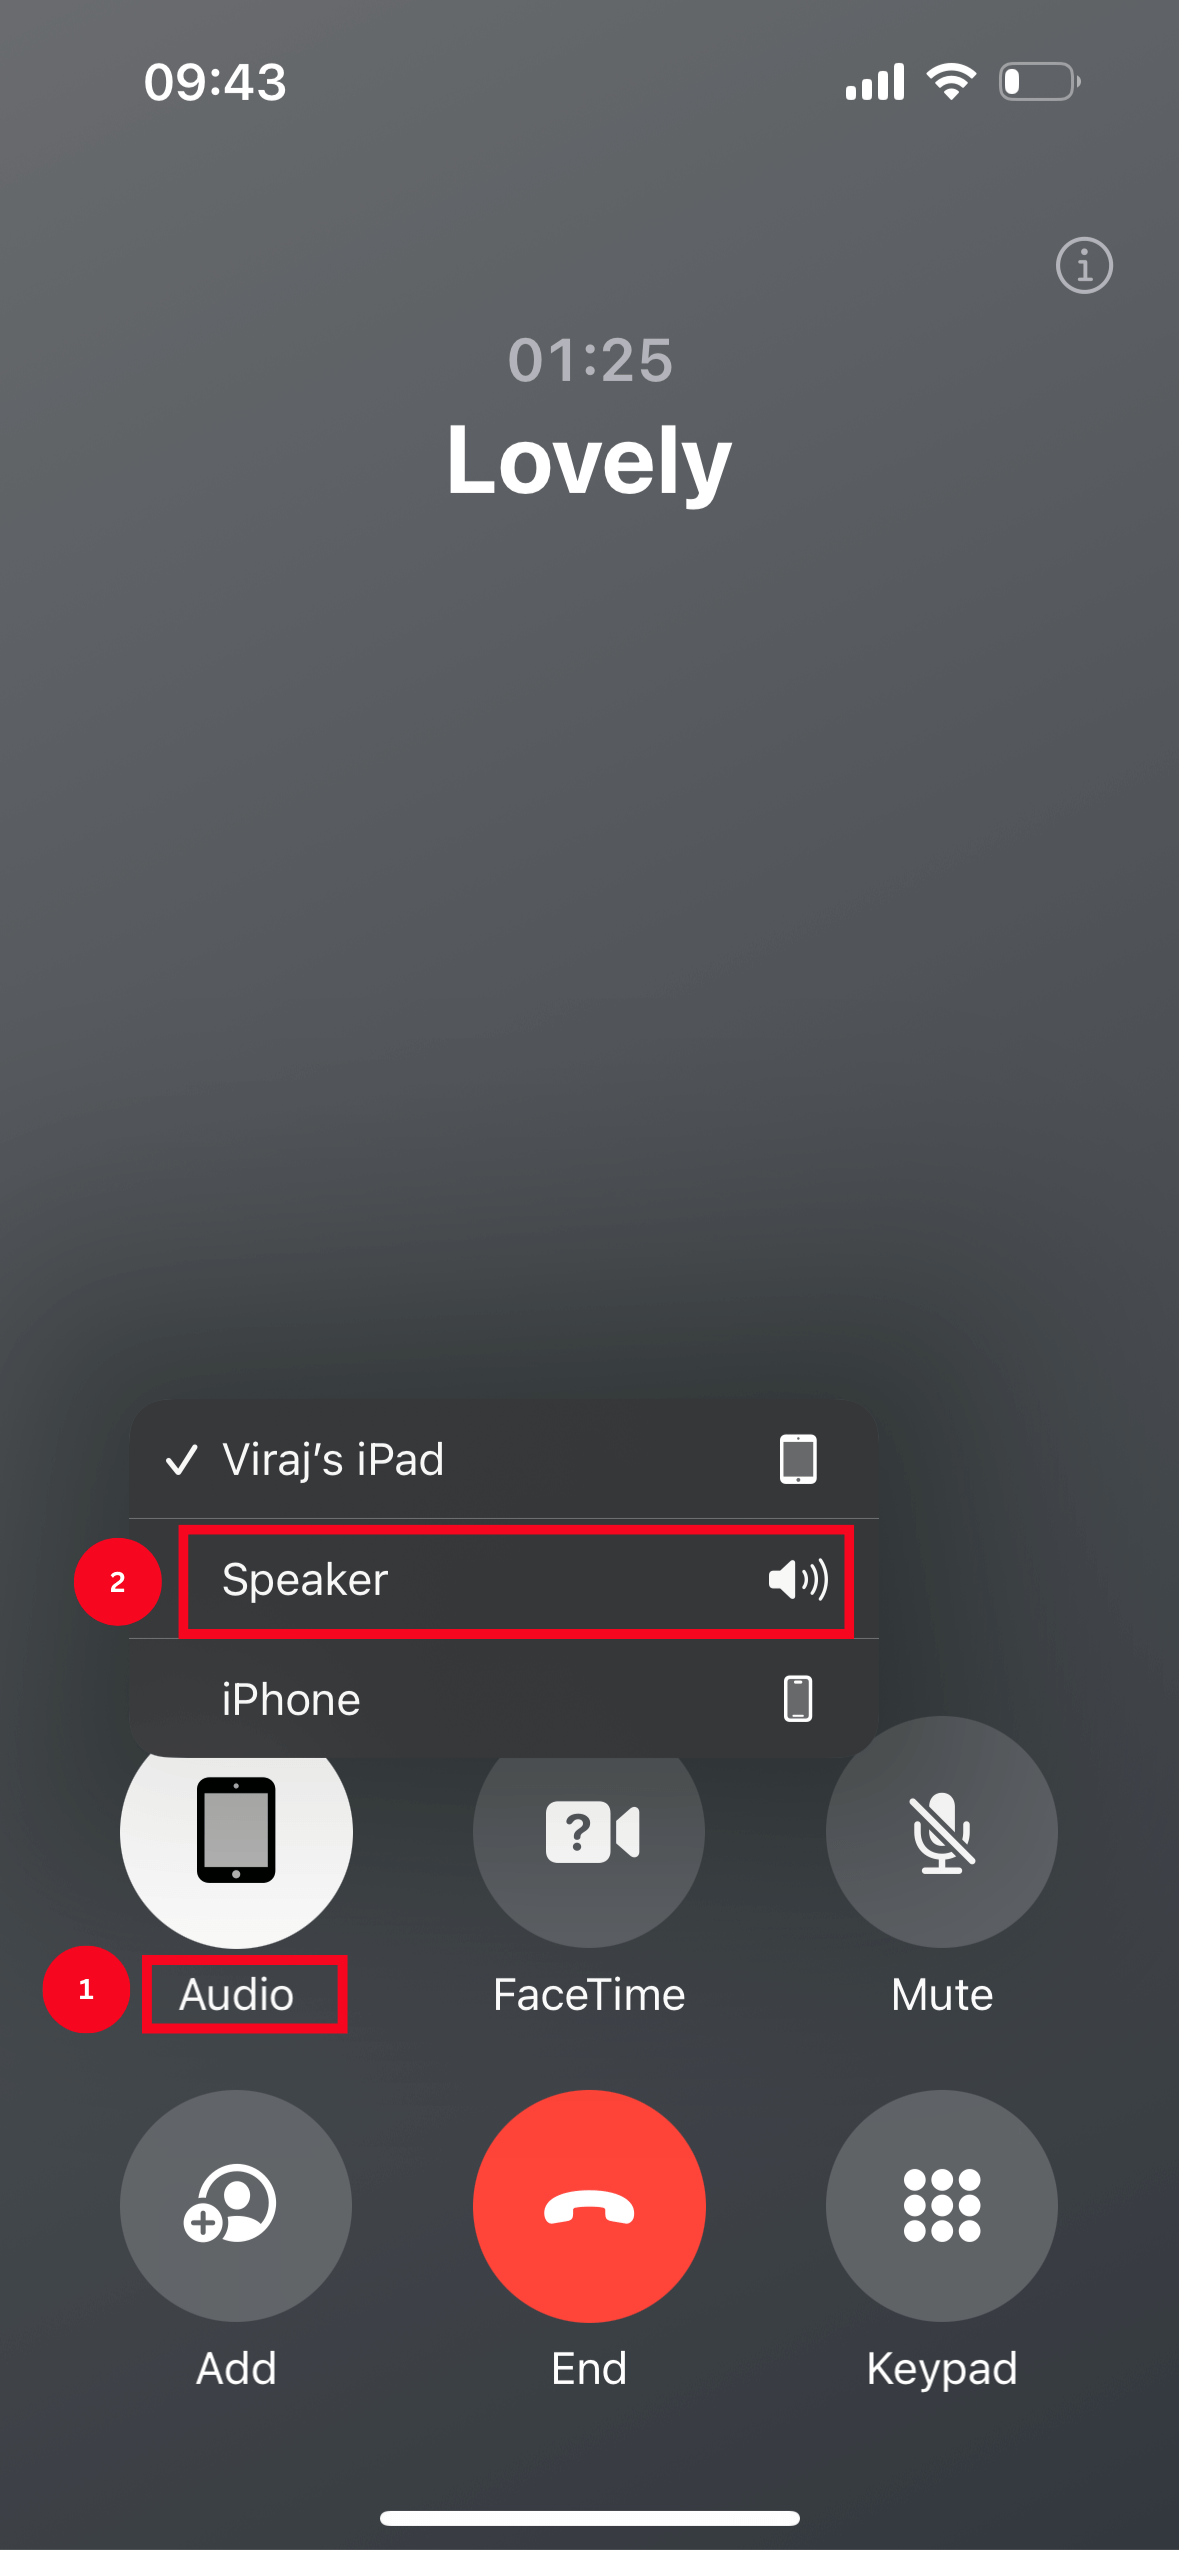 Start the call and select audio followed by speaker